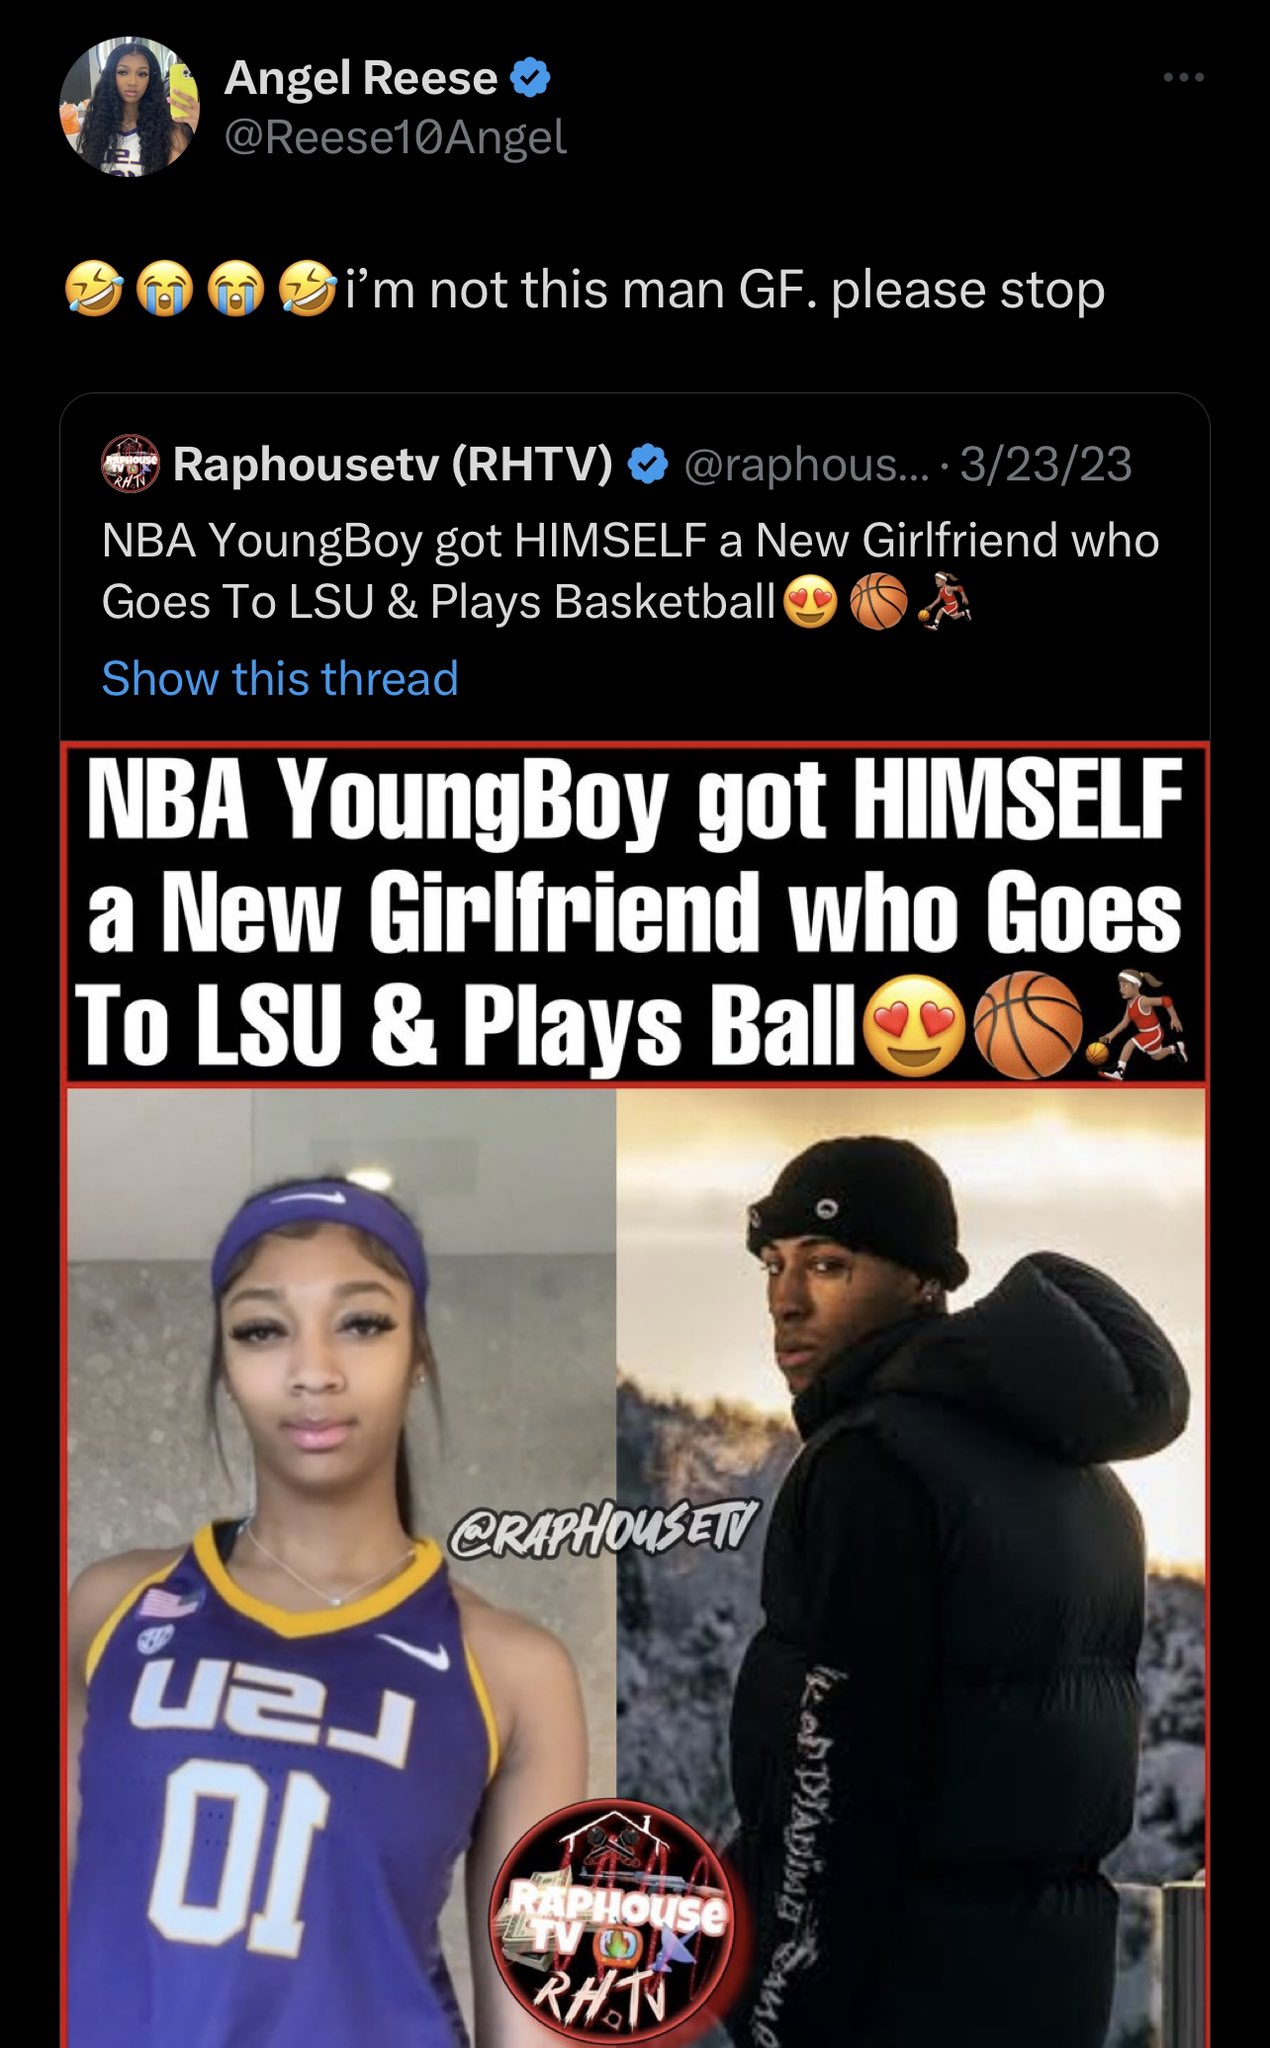 Angel Reese denies dating NBA Youngboy.